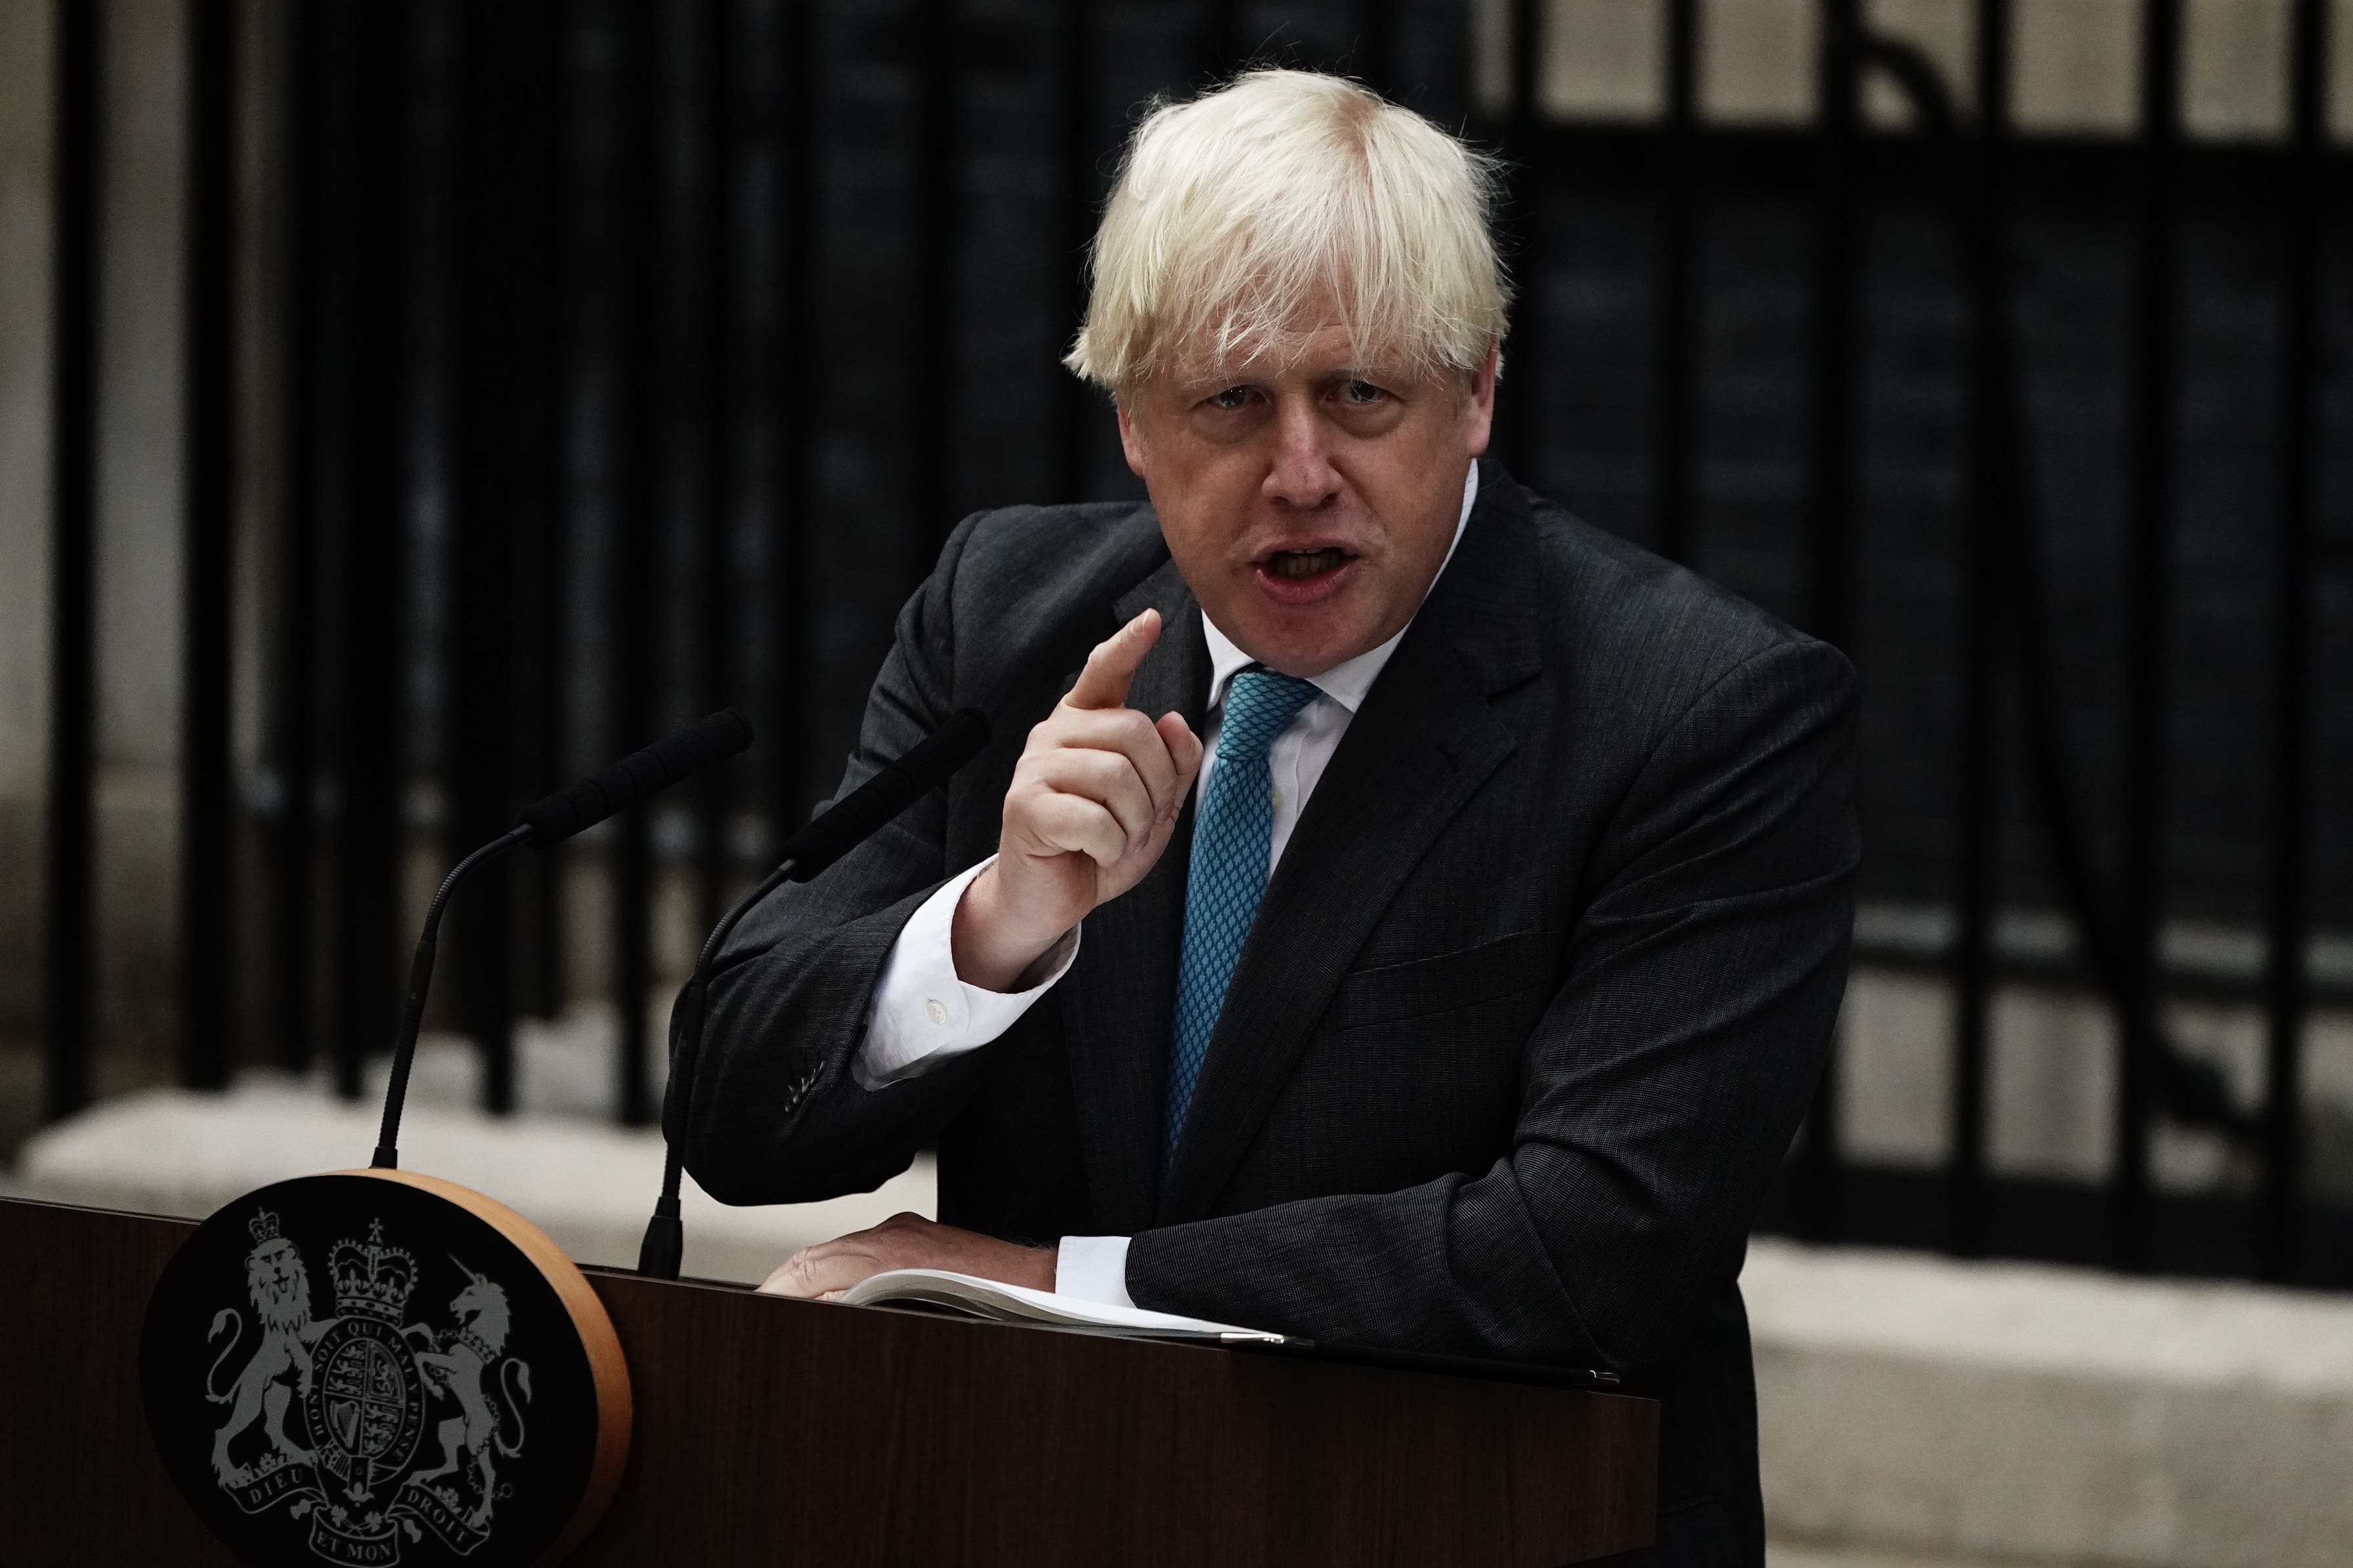 Boris Johnson took more than £18,000 as a severance payment when he resigned as prime minister